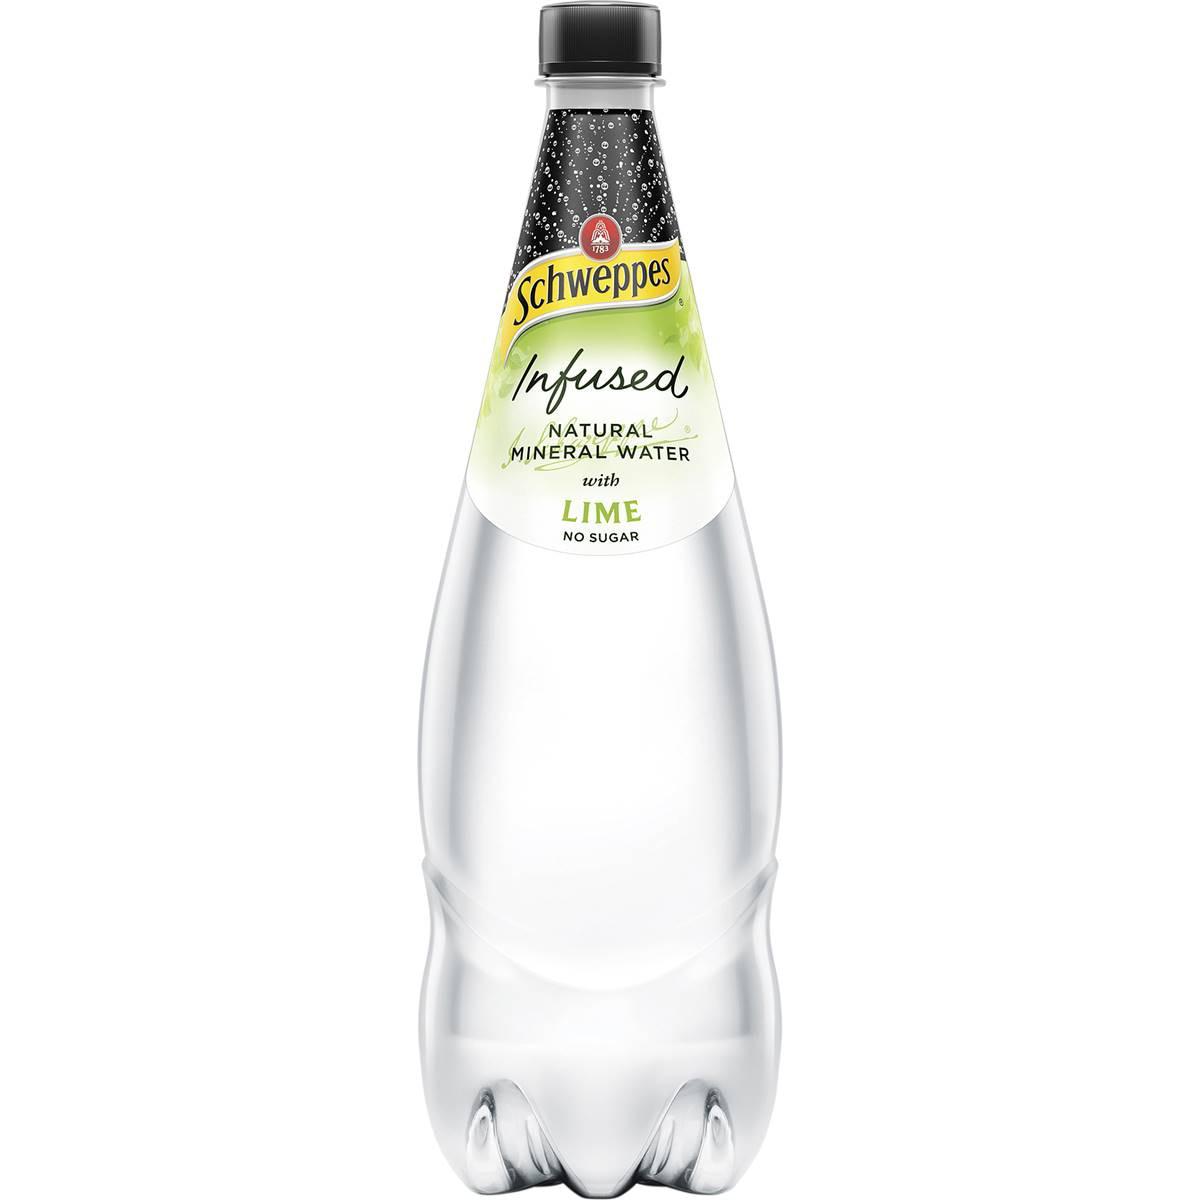 Schweppes Zero Sugar Lime Infused Mineral Water Bottle 1.1l